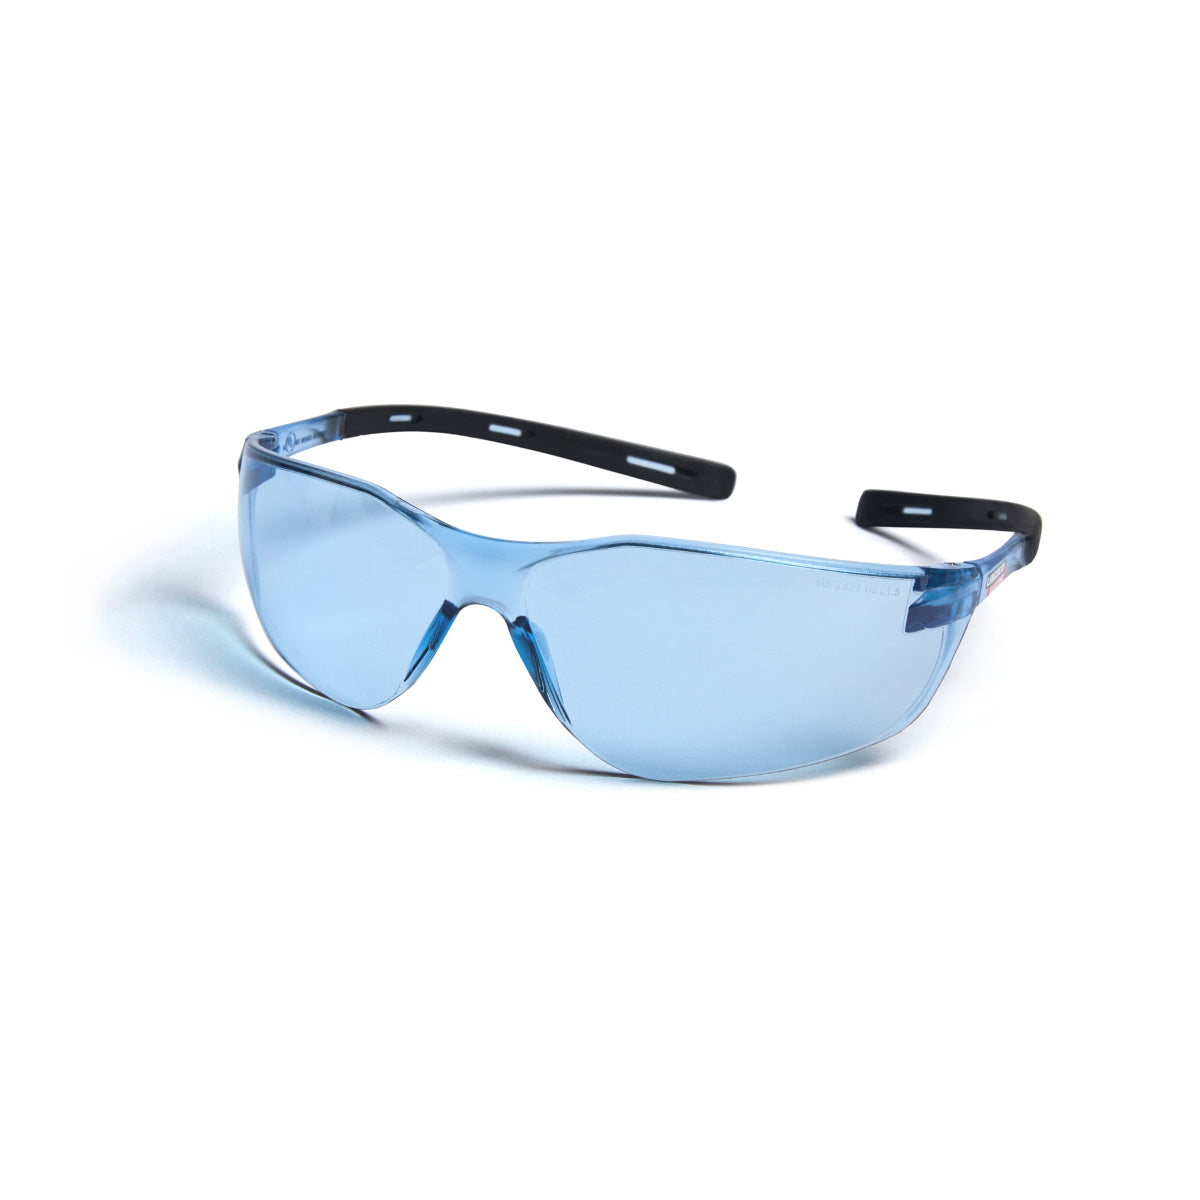 Lincoln Axilite Blue Anti-Fog/Scratch Safety Glasses (K4675-1)